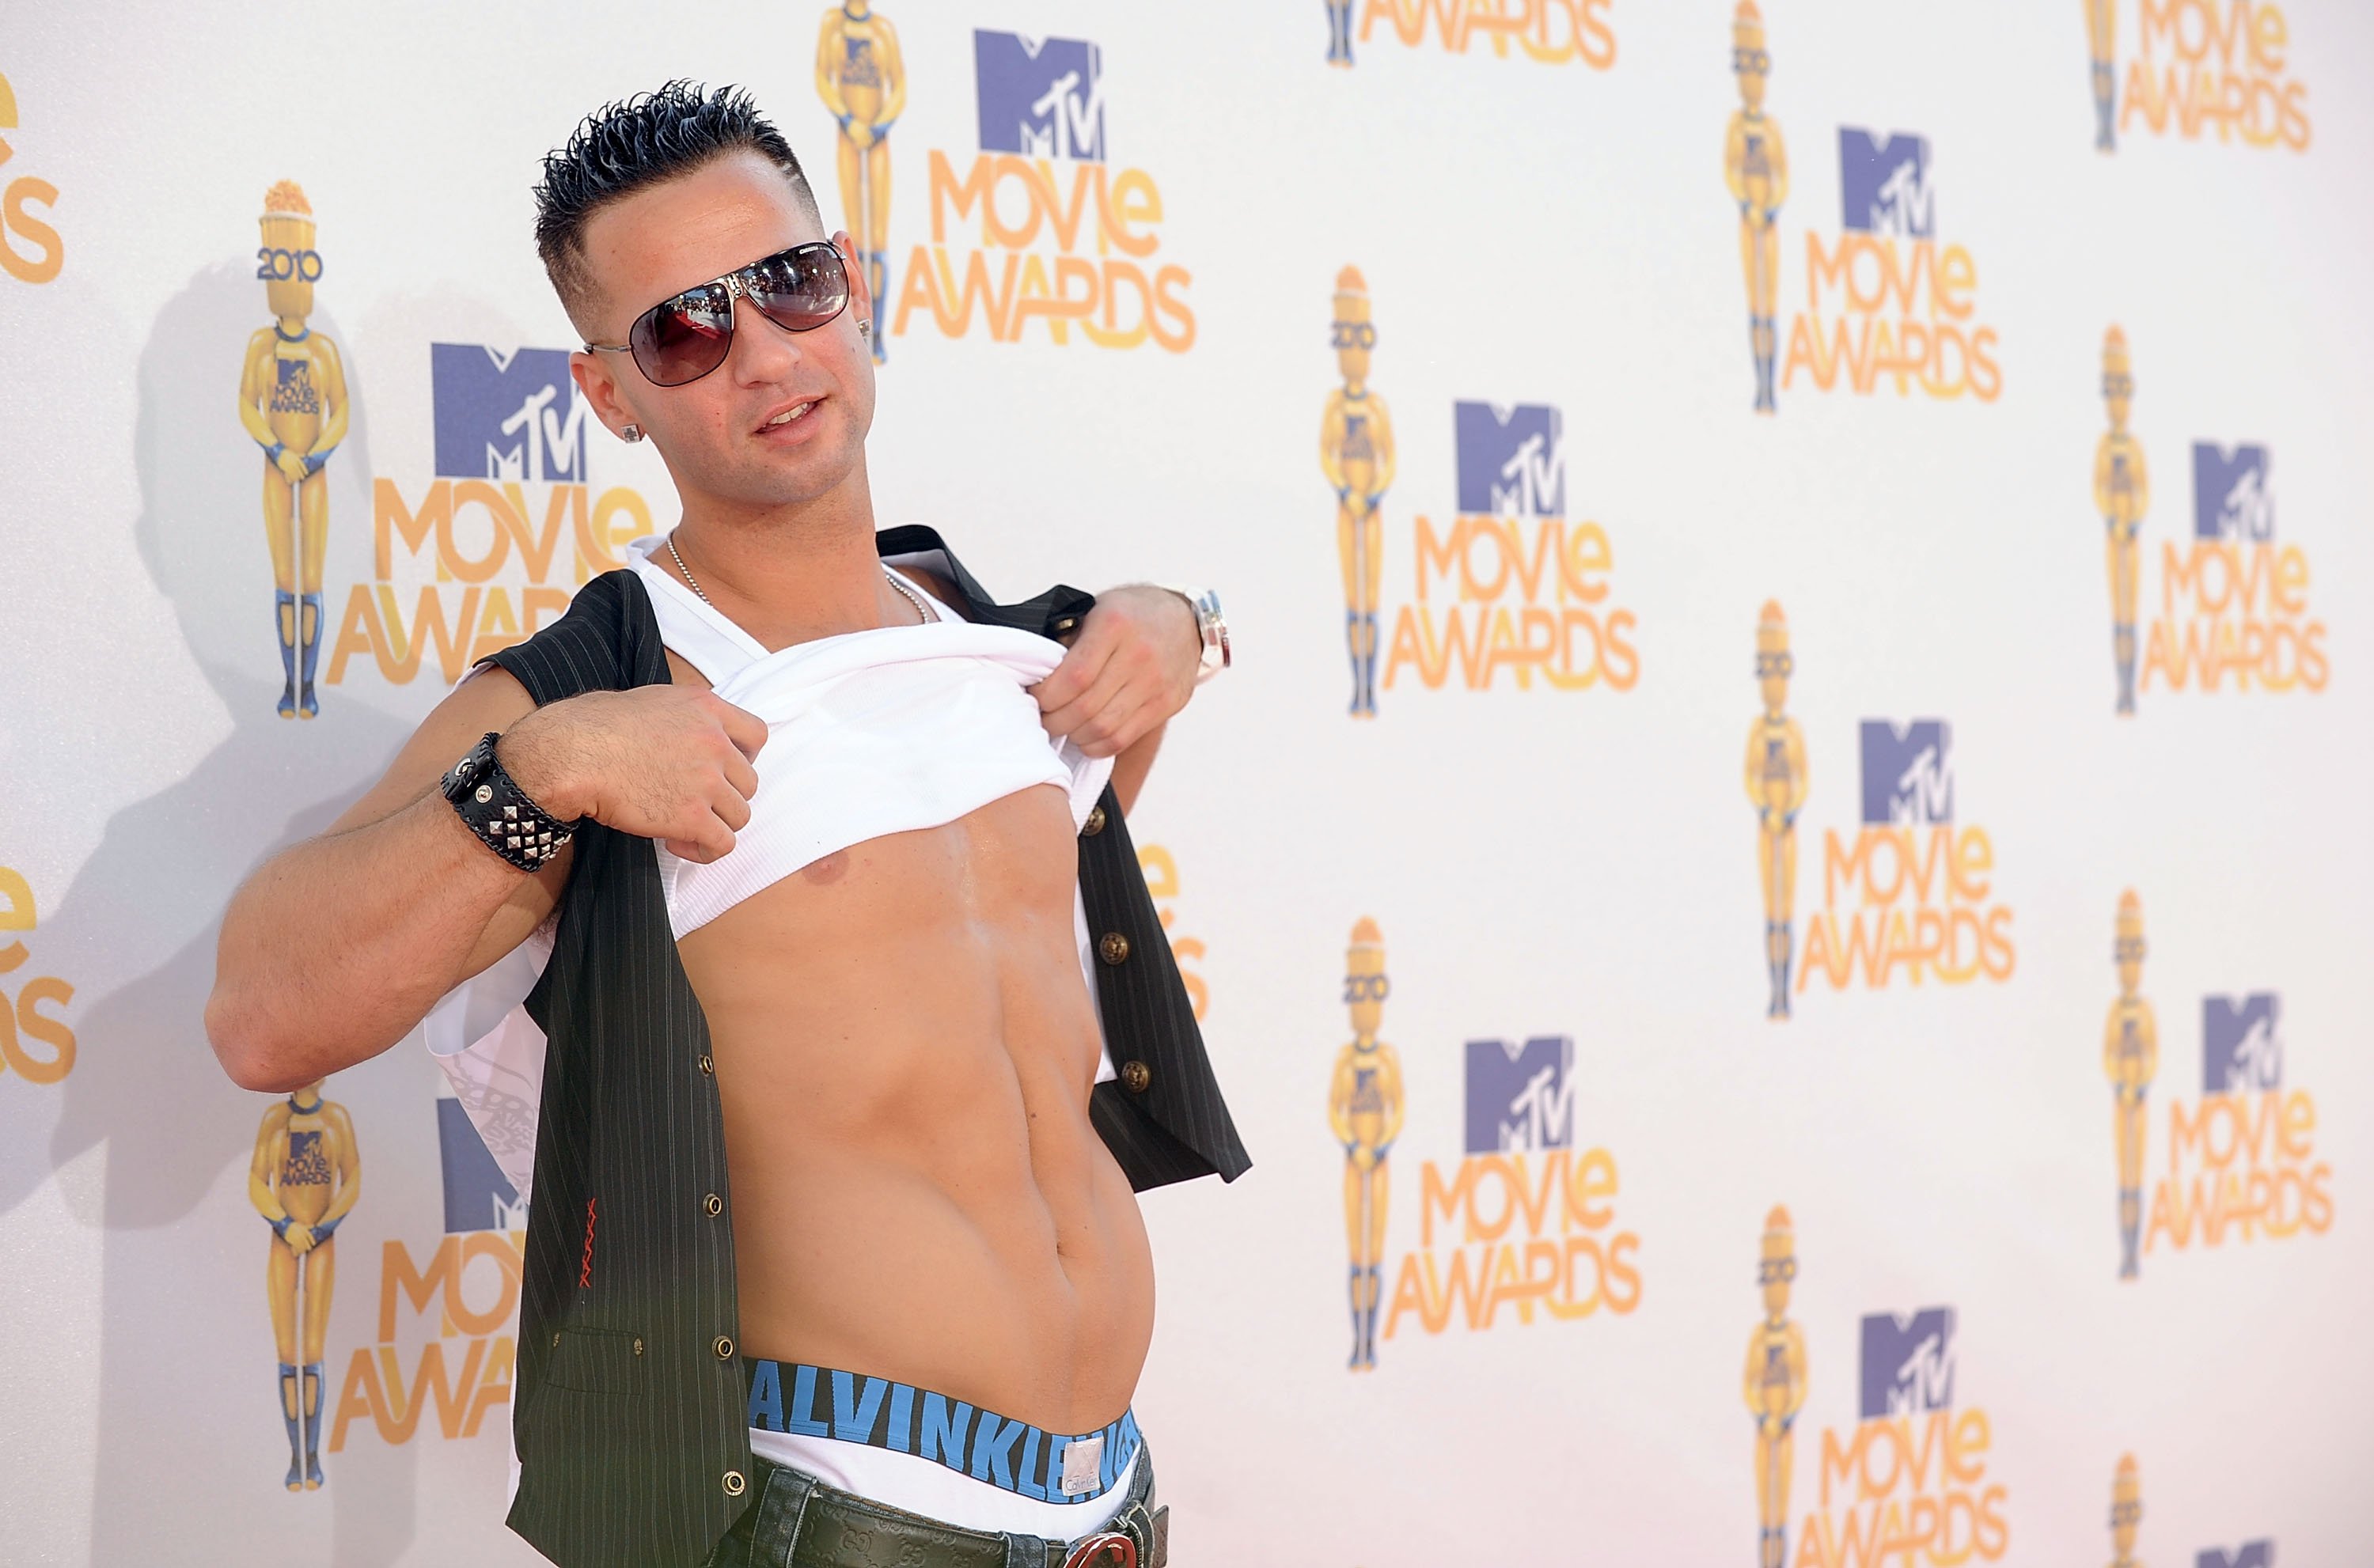 'Jersey Shore' star Mike 'The Situation' Sorrentino shows off his abs at the 2010 MTV Movie Awards